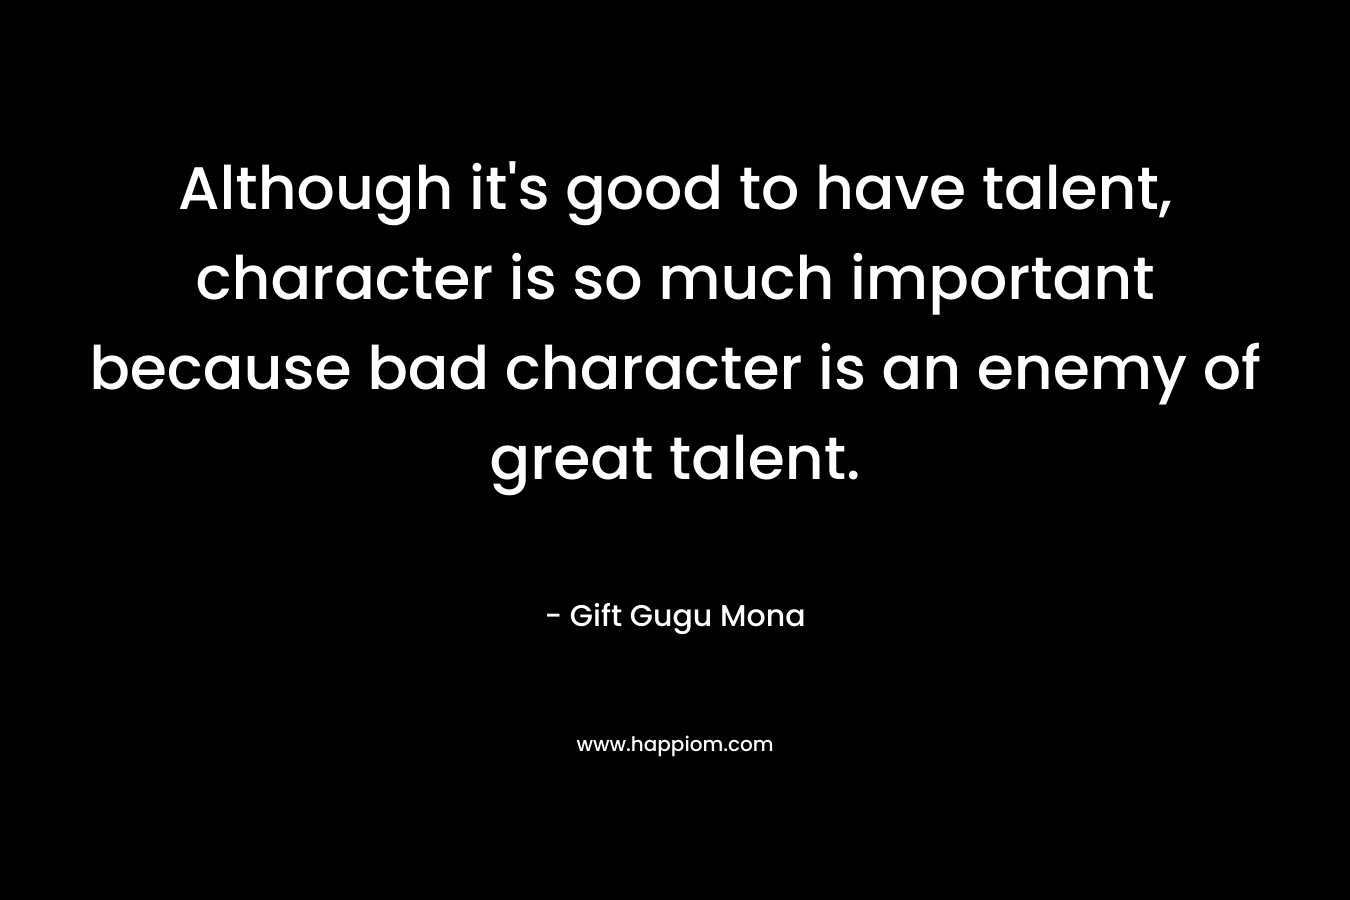 Although it's good to have talent, character is so much important because bad character is an enemy of great talent.